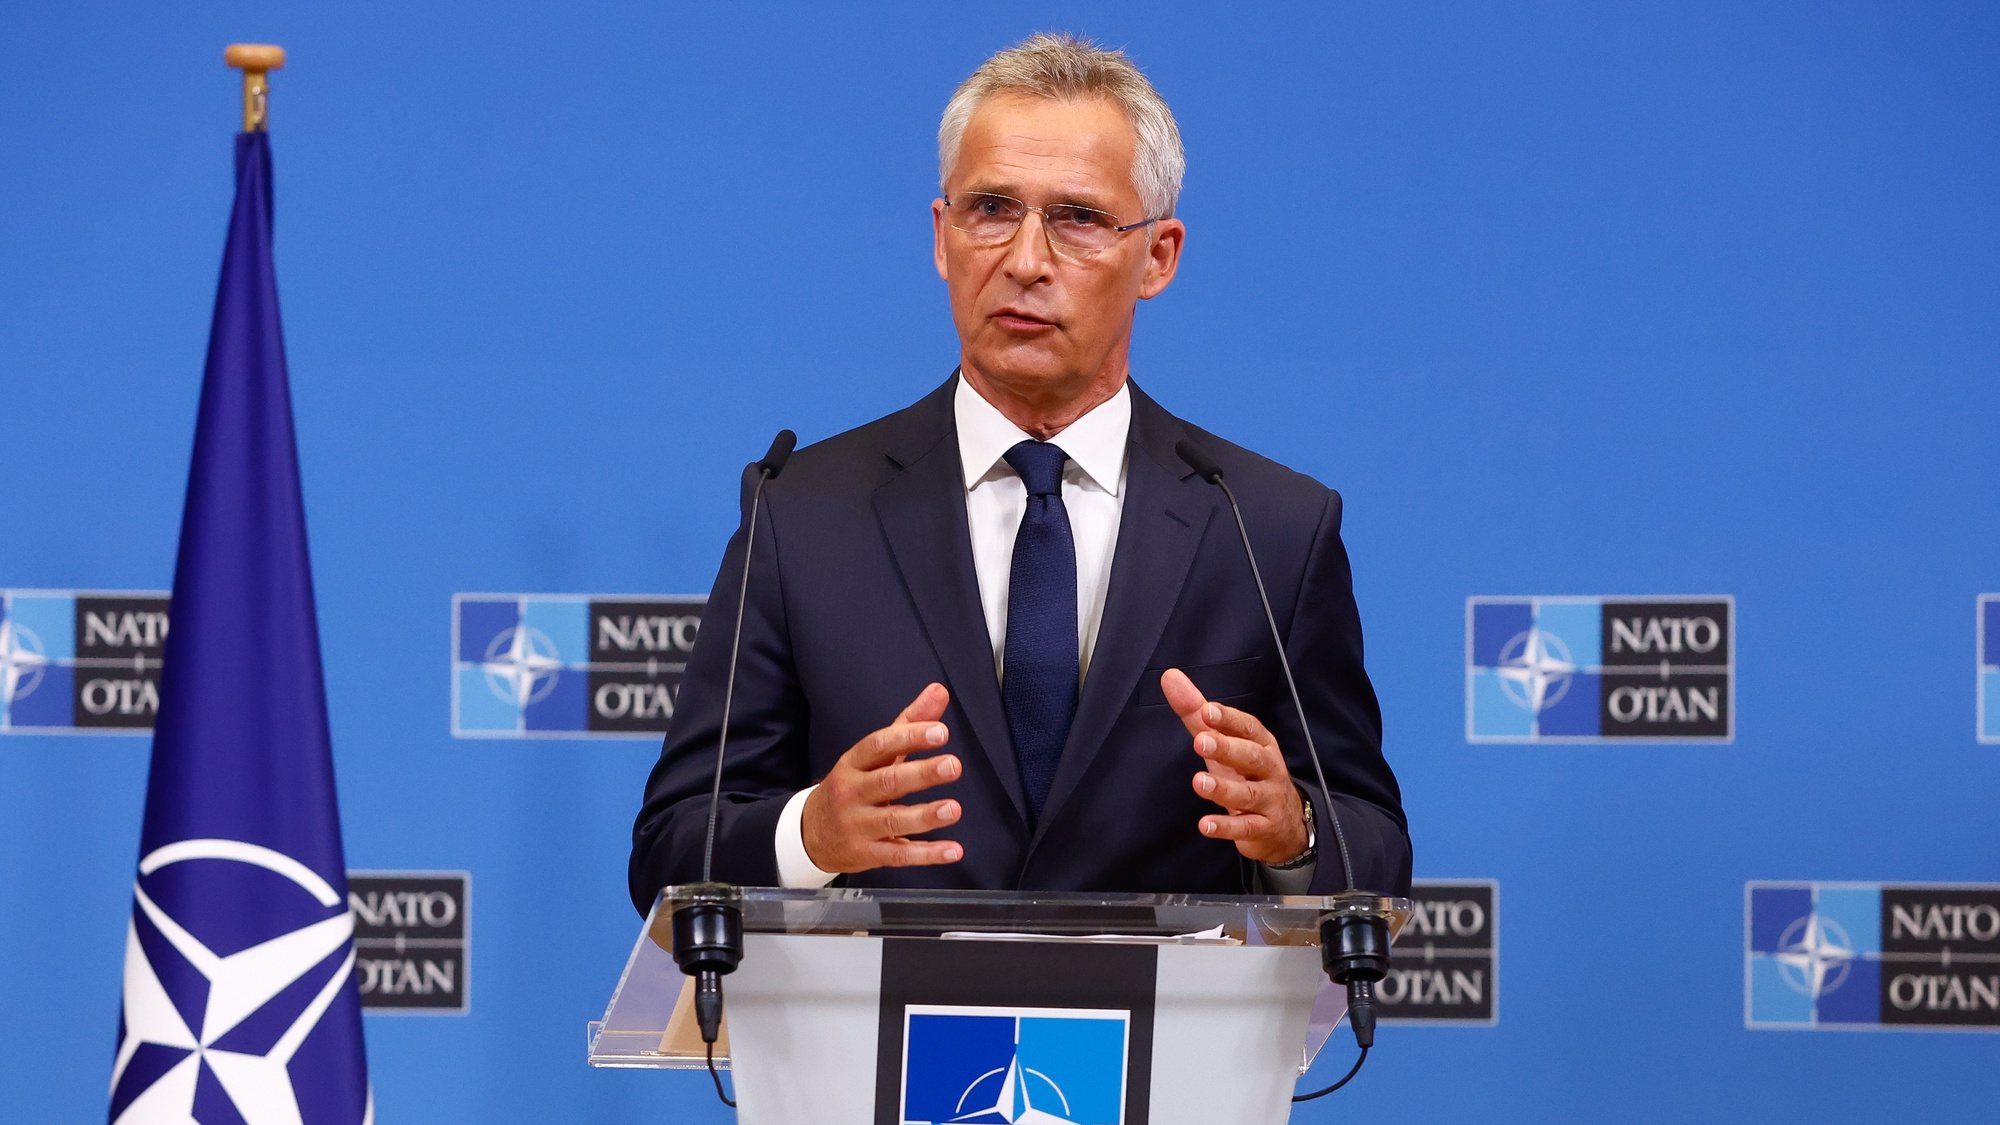 epa10173154 NATO Secretary General Jens Stoltenberg attends a joint press conference with US Secretary of State Blinken after a meeting at NATO headquarter in Brussels, Belgium, 09 September 2022.  EPA/STEPHANIE LECOCQ